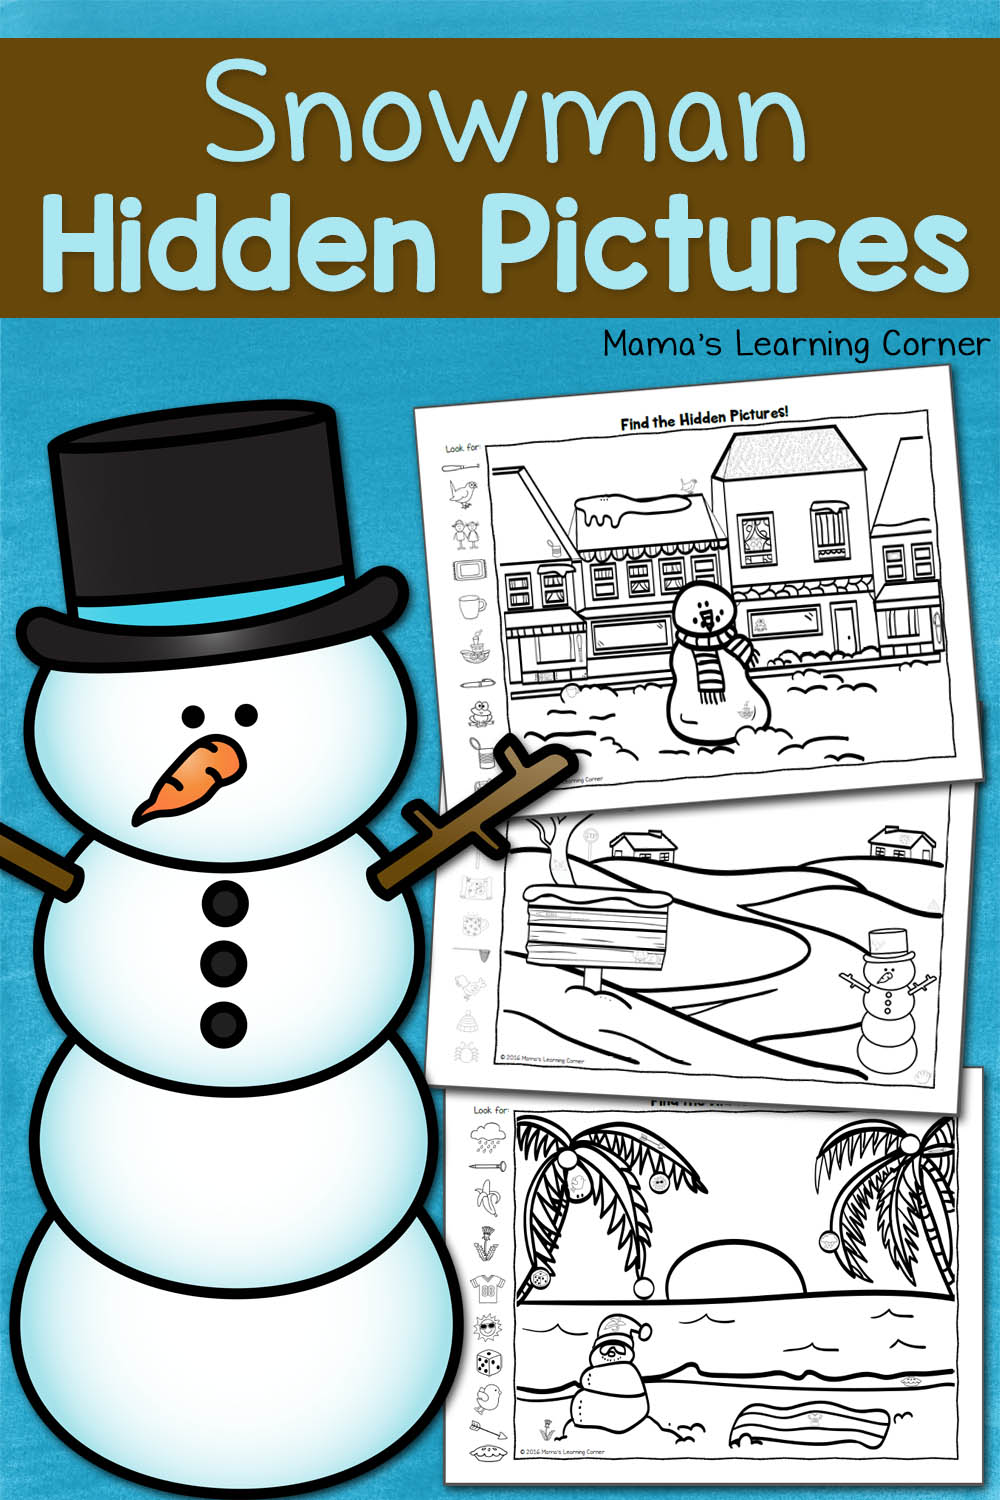 Snowman Hidden Pictures Printables - Mamas Learning Corner